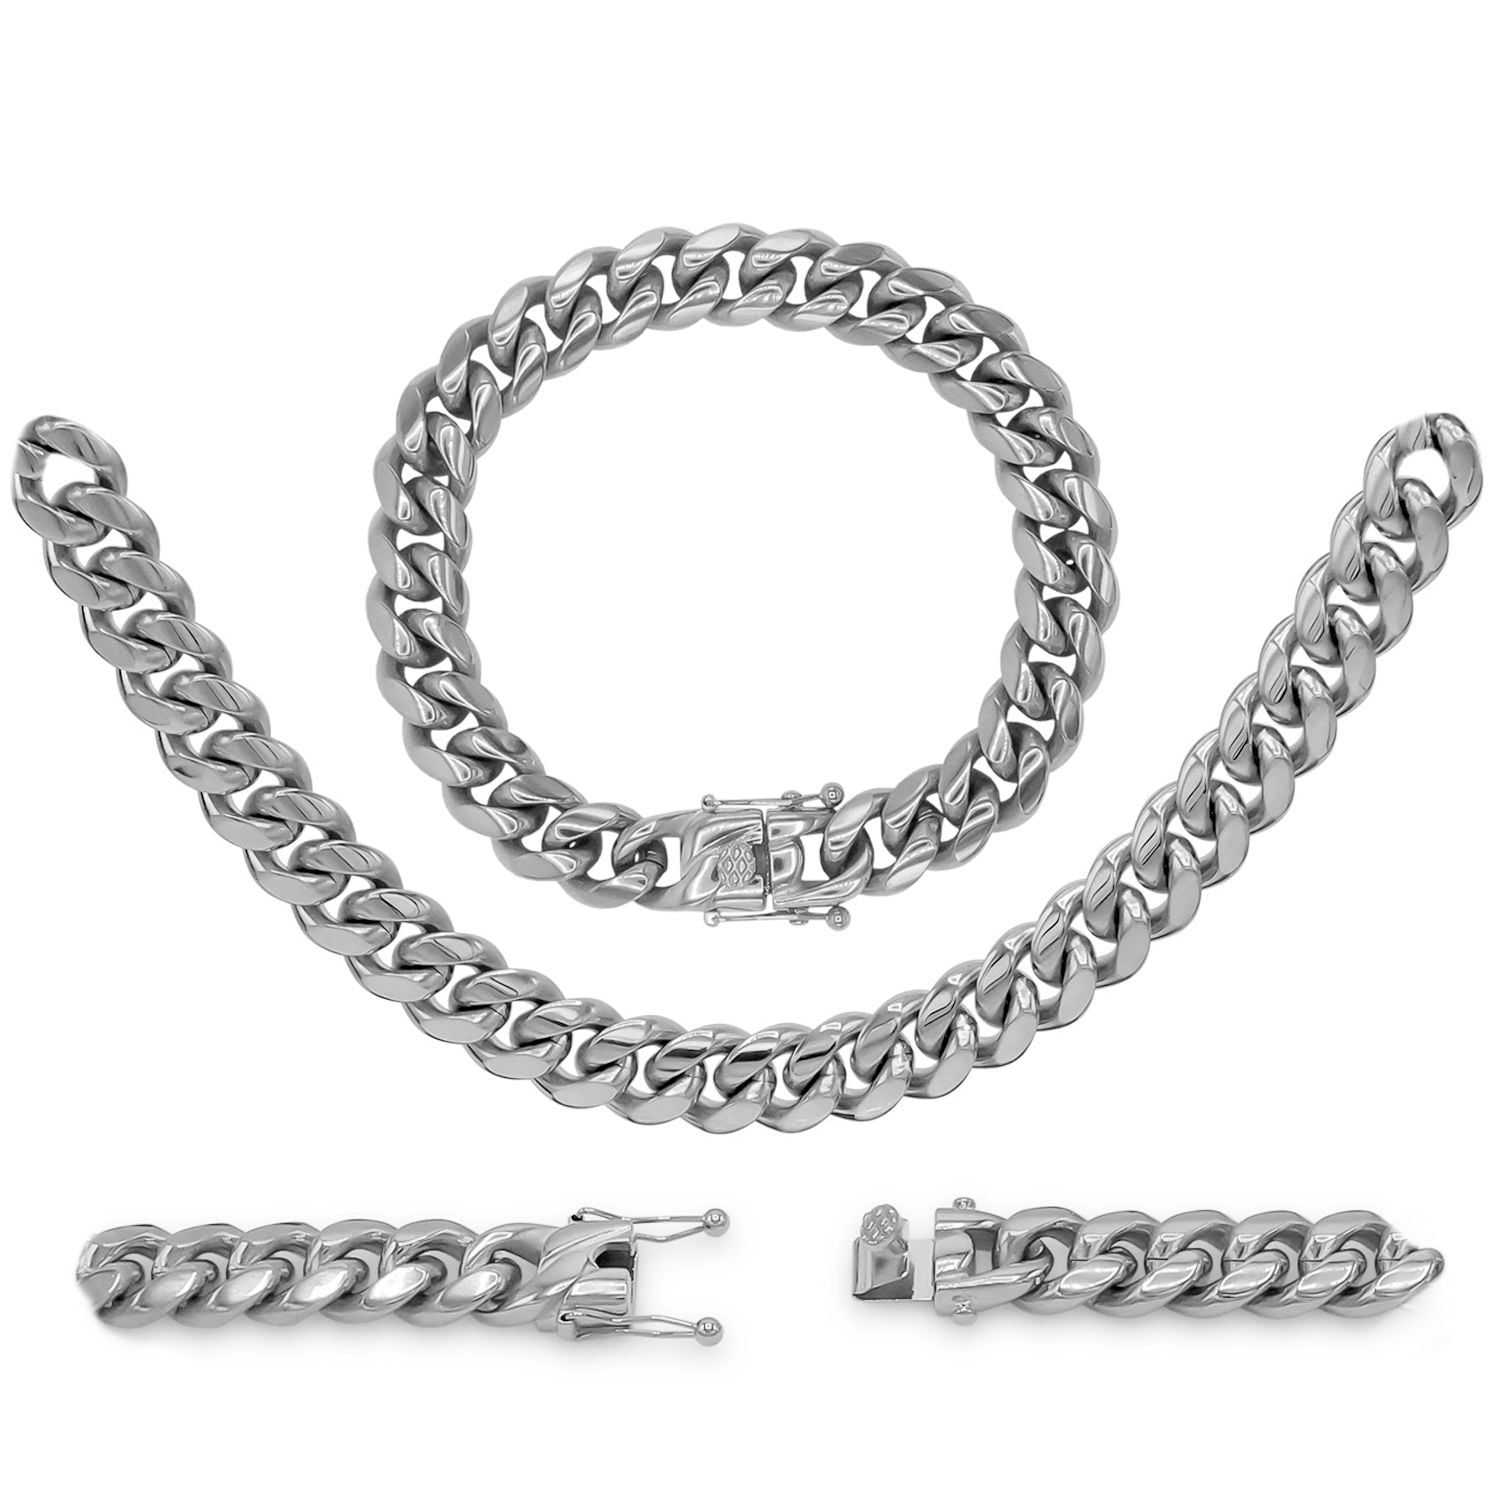 with Secure Lobster Lock Clasp Solid 925 Sterling Silver 5.4mm Beveled Oval Cable Chain Necklace 